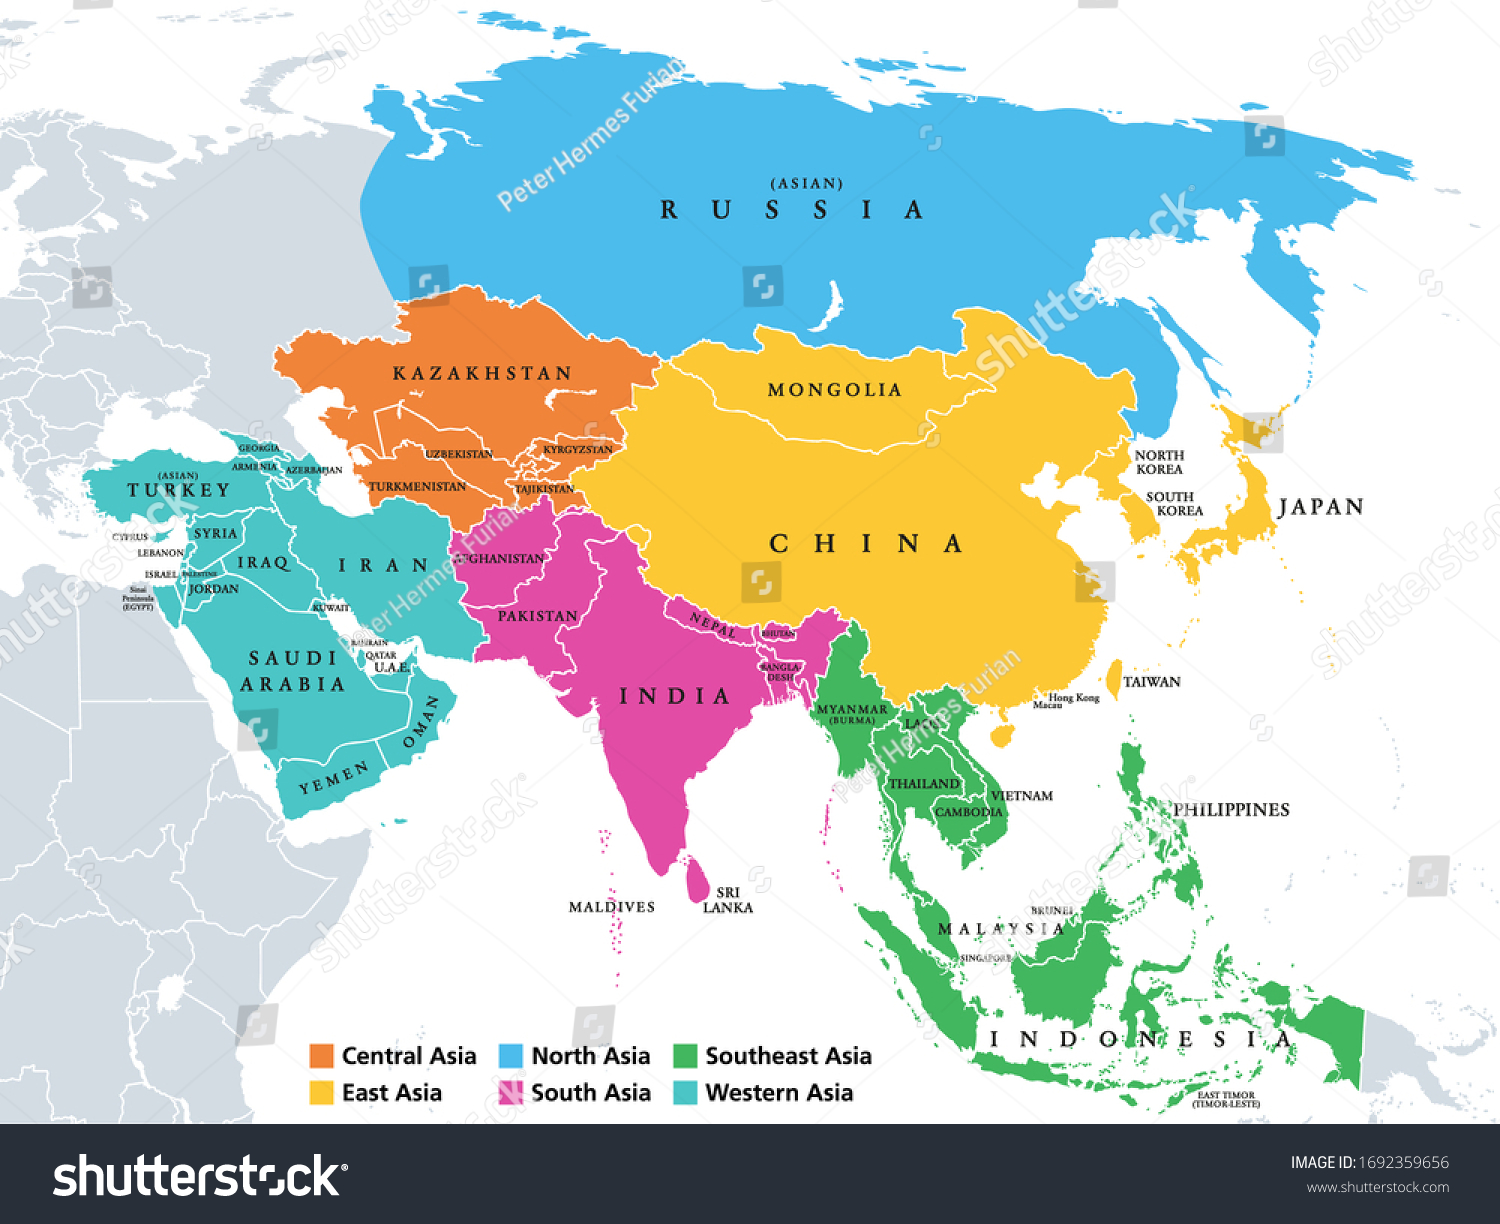 Asia Map - World's Largest And Most Diverse Continent